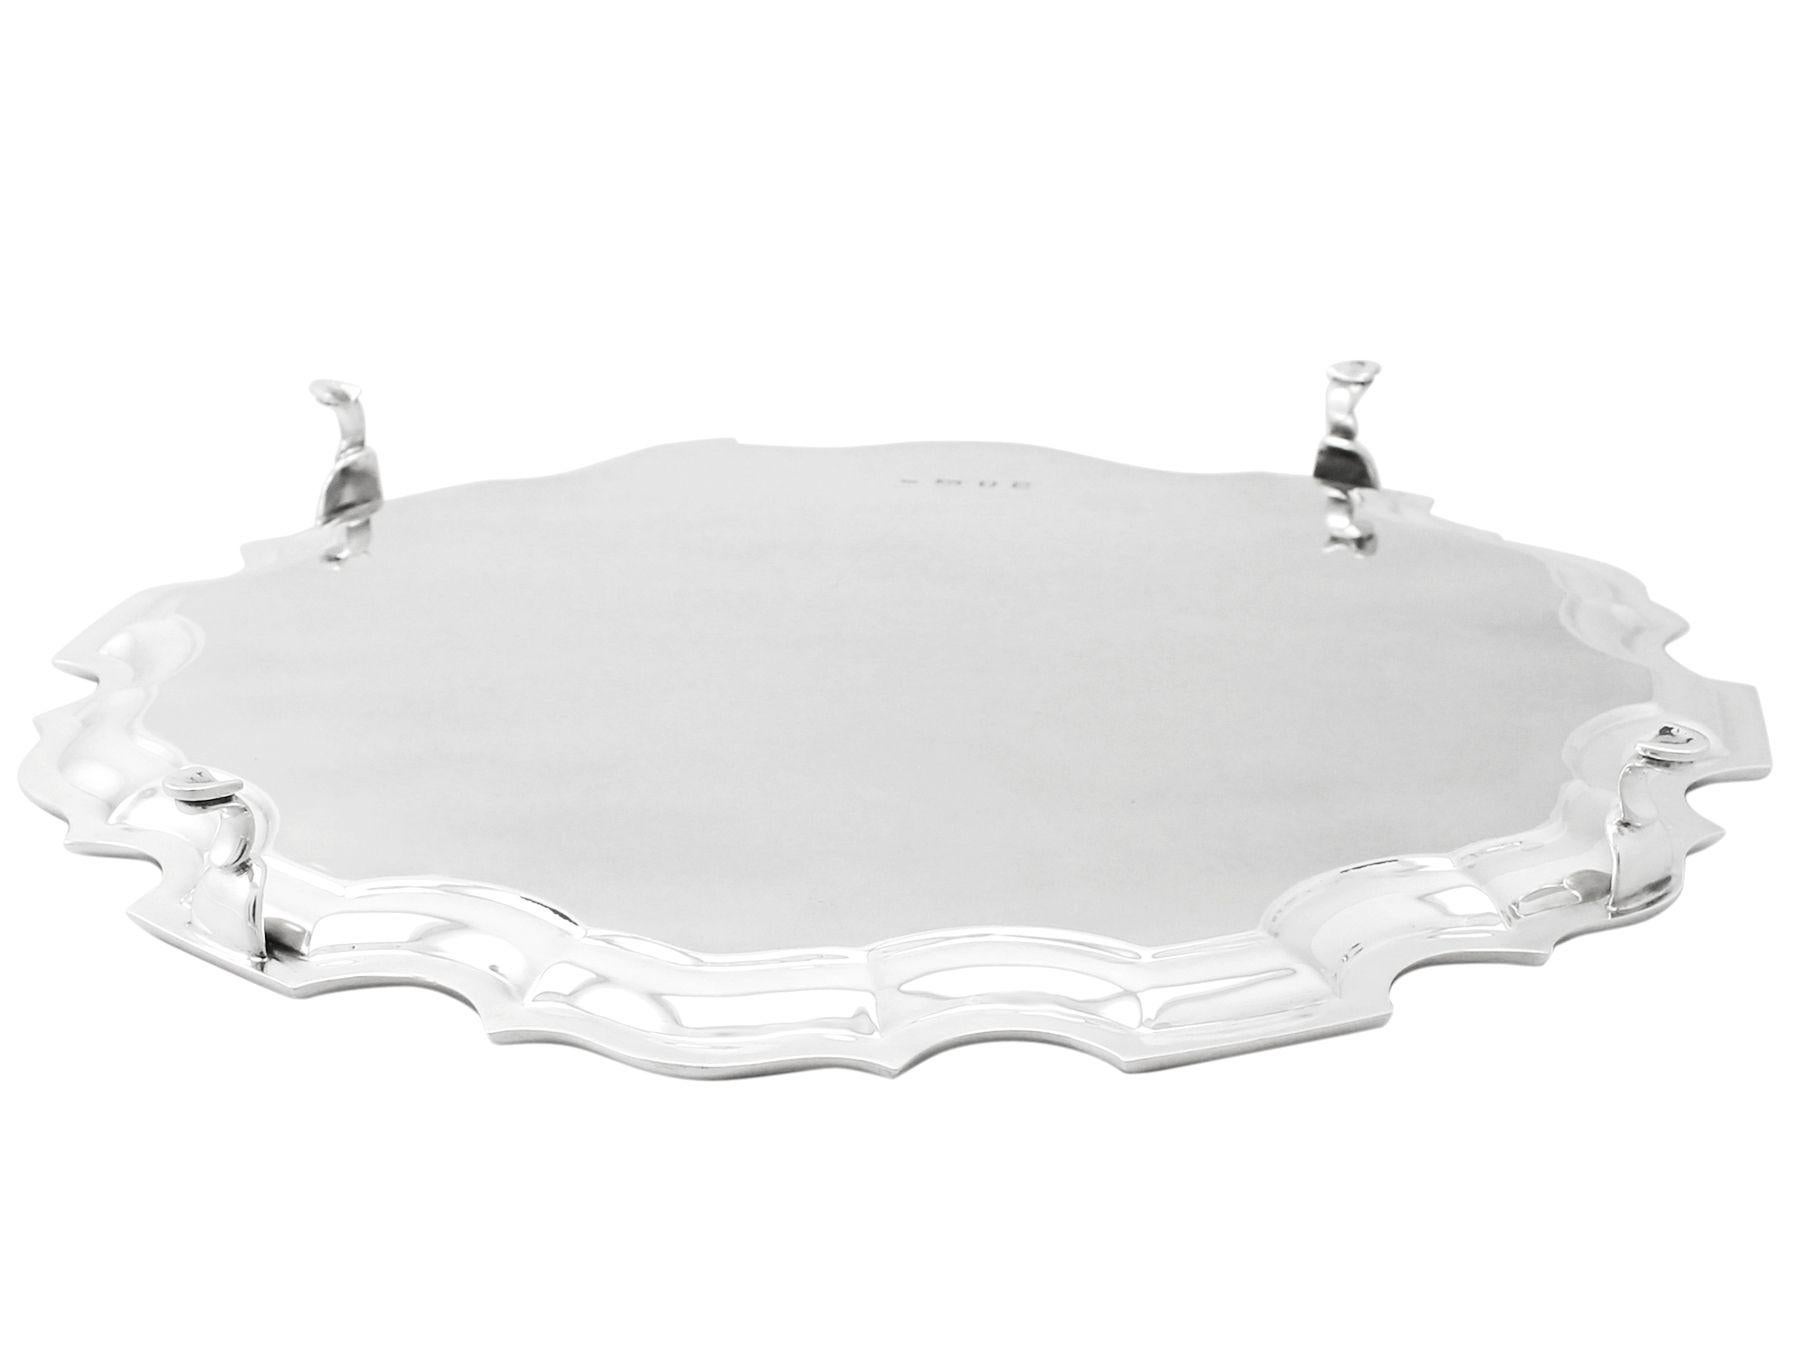 Josiah Williams & Co Antique Sterling Silver Salver (1938) For Sale 1